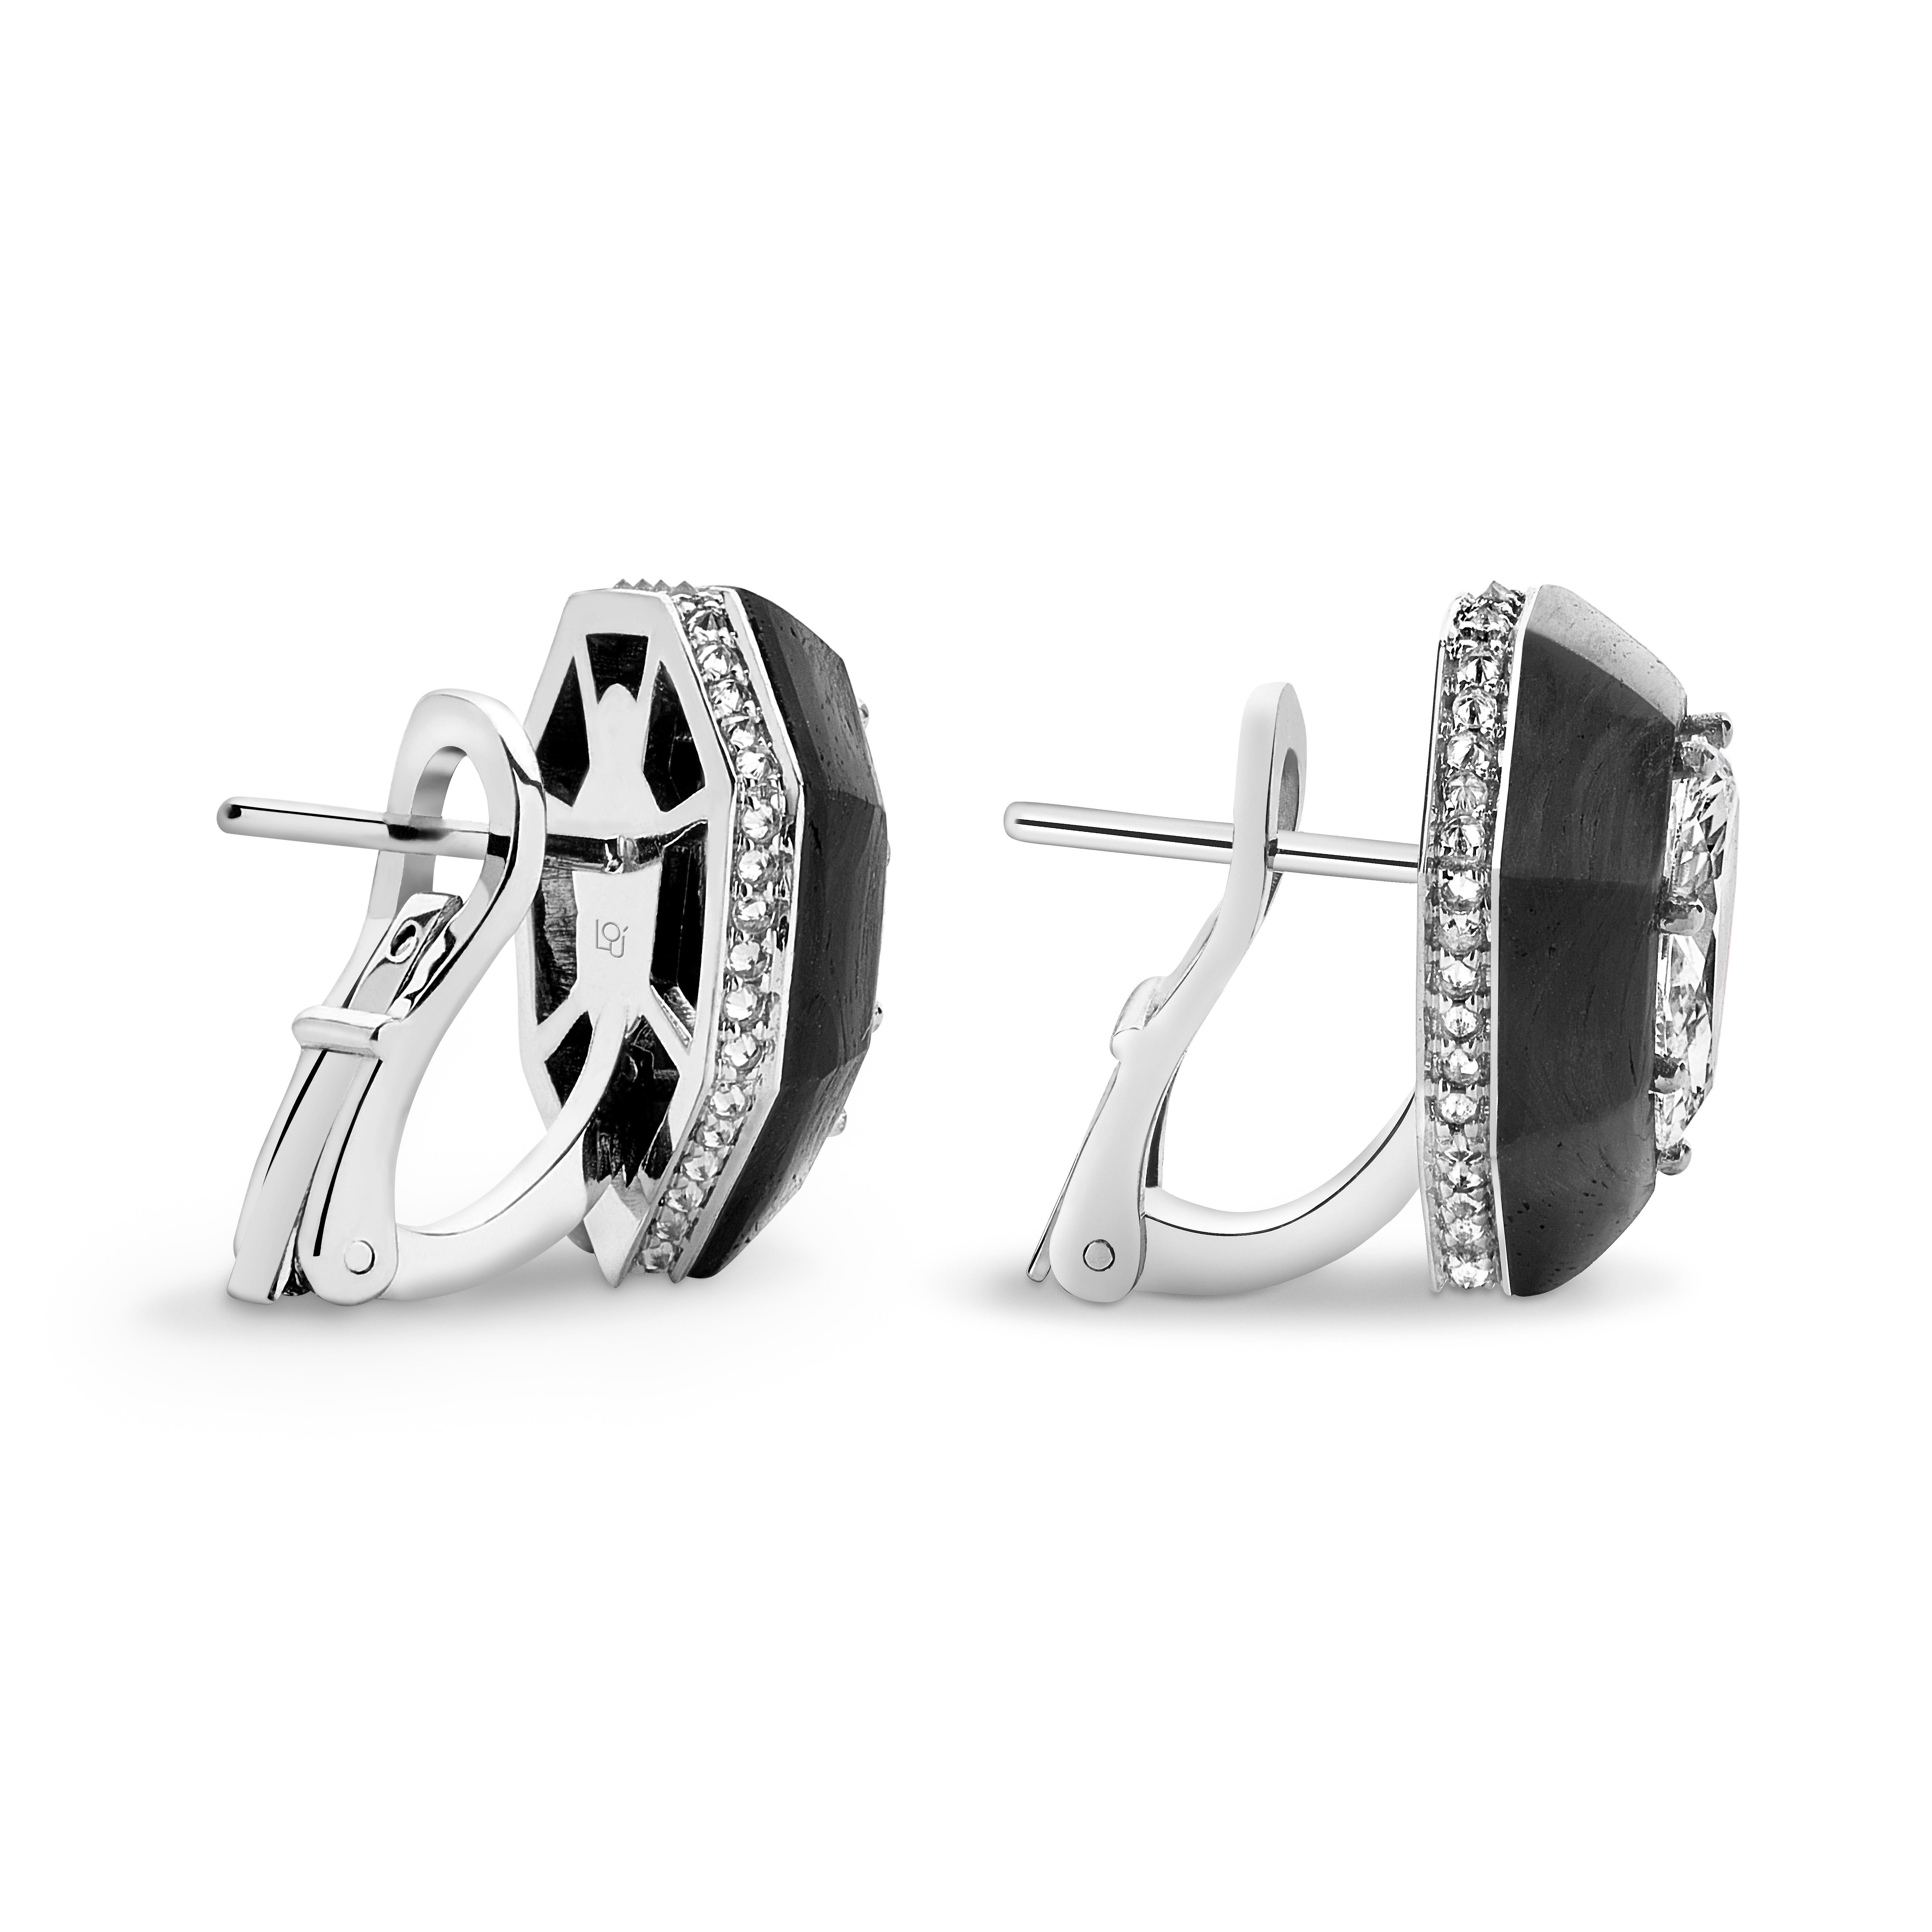 Earrings hand crafted in Carbon Fiber, 18K white gold.

Carat weight (White Diamonds - centre stones): 2.41
Carat weight (White Diamonds - pave): 0.4
Carat total weight: 2.86
Weight of white gold: 6 gr.

Intricate work in carbon fiber is done by